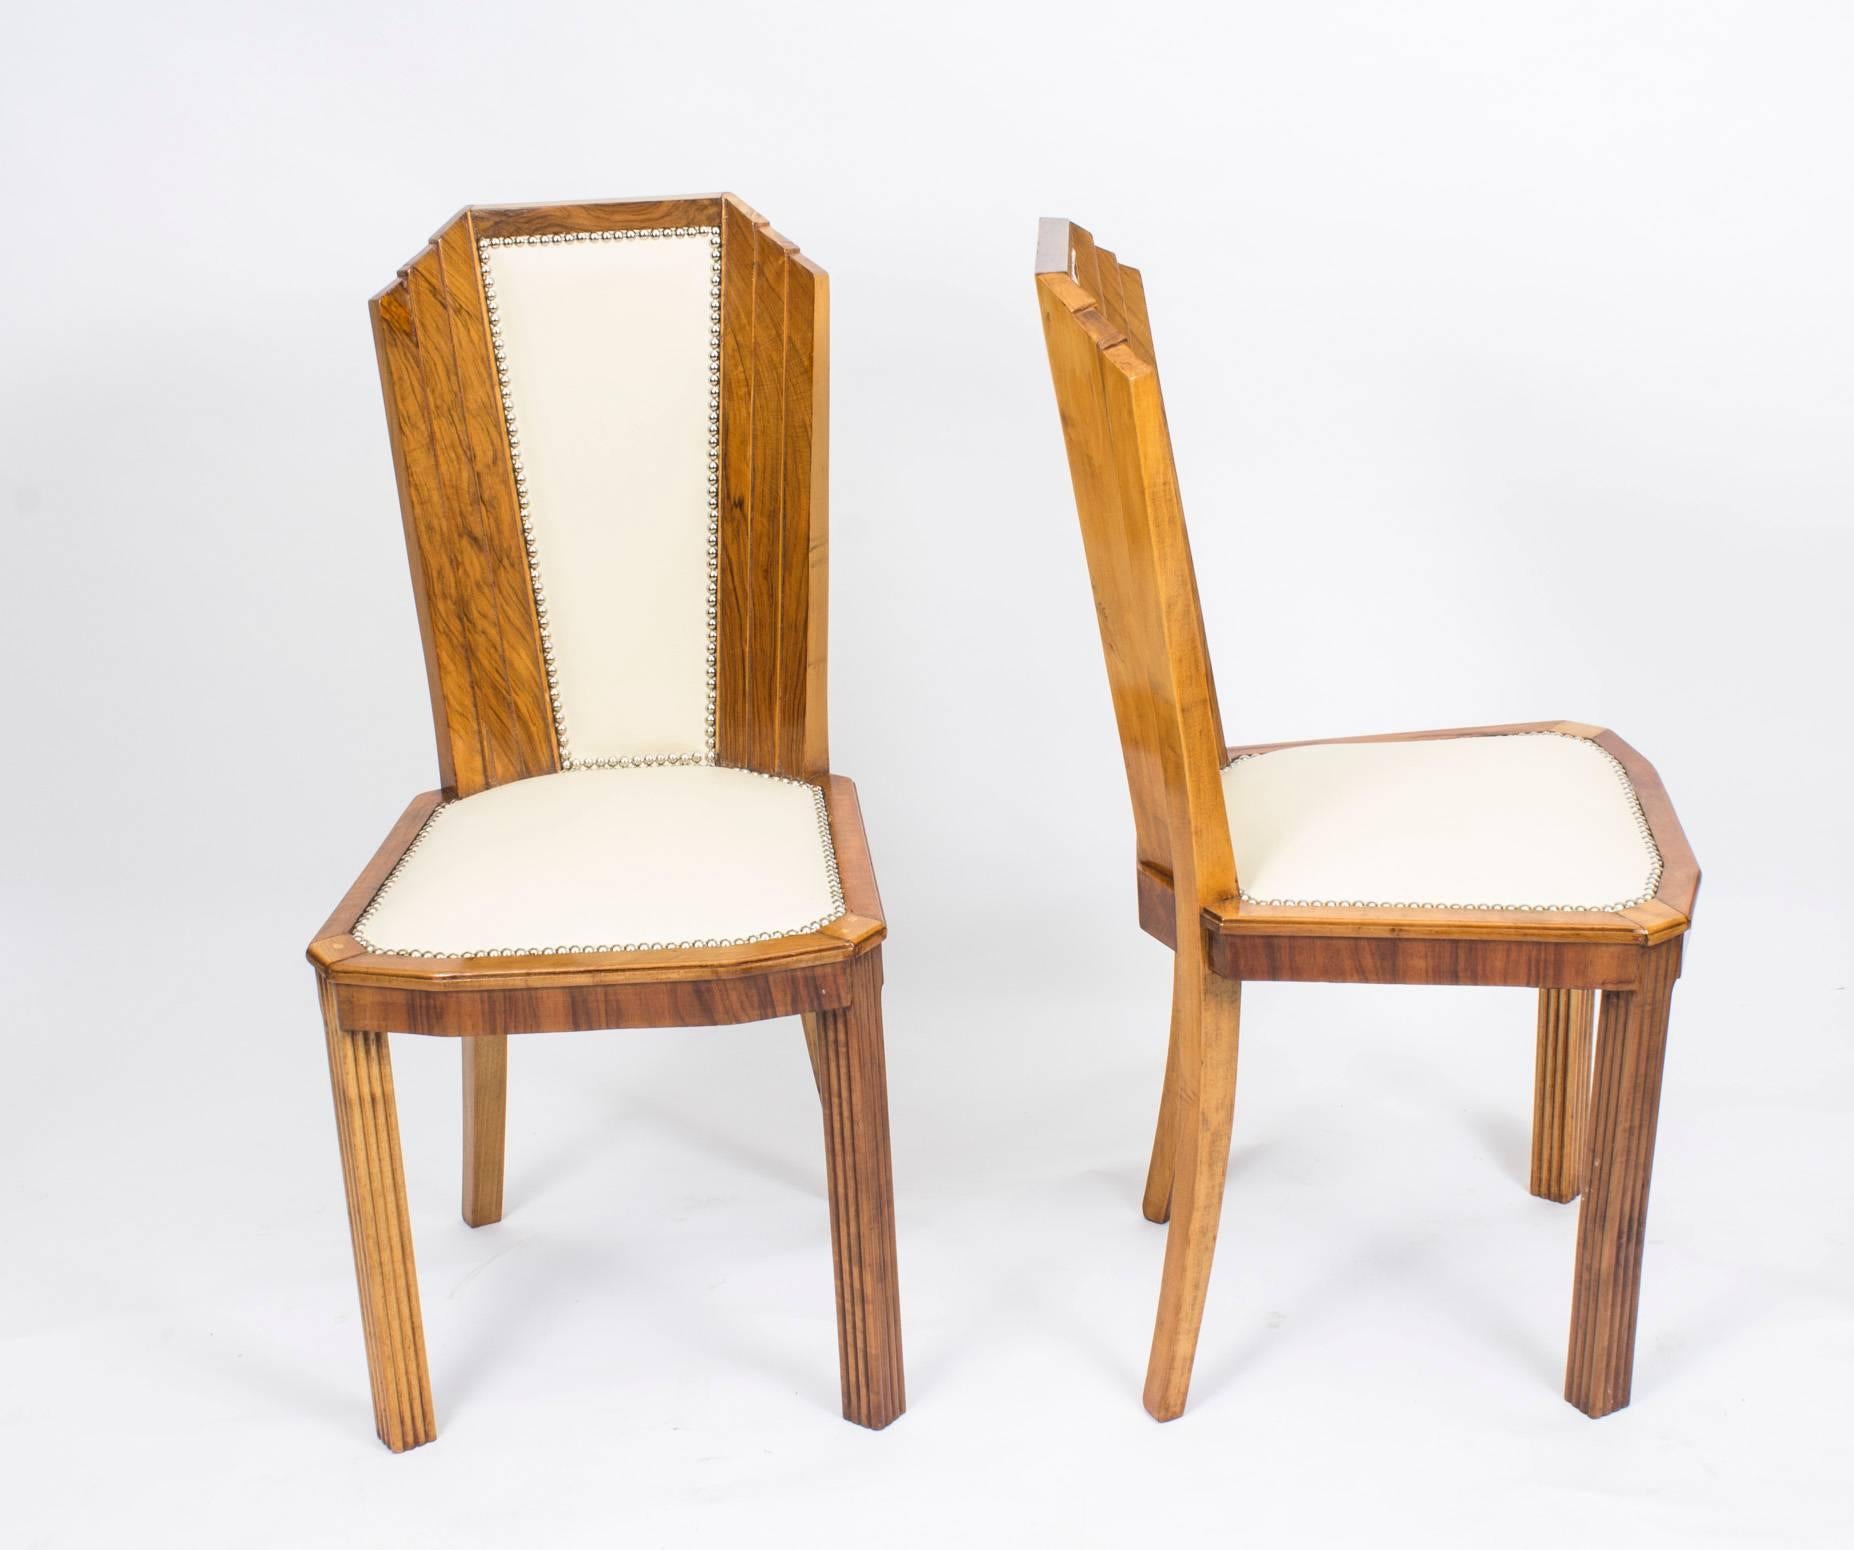 This is a stunning set of six antique Art Deco skyscraper burr walnut dining chairs, circa 1930 in date.

They have been reupholstered in fabulous white leather with chrome studs.

They are of striking burr walnut and feature an architectural